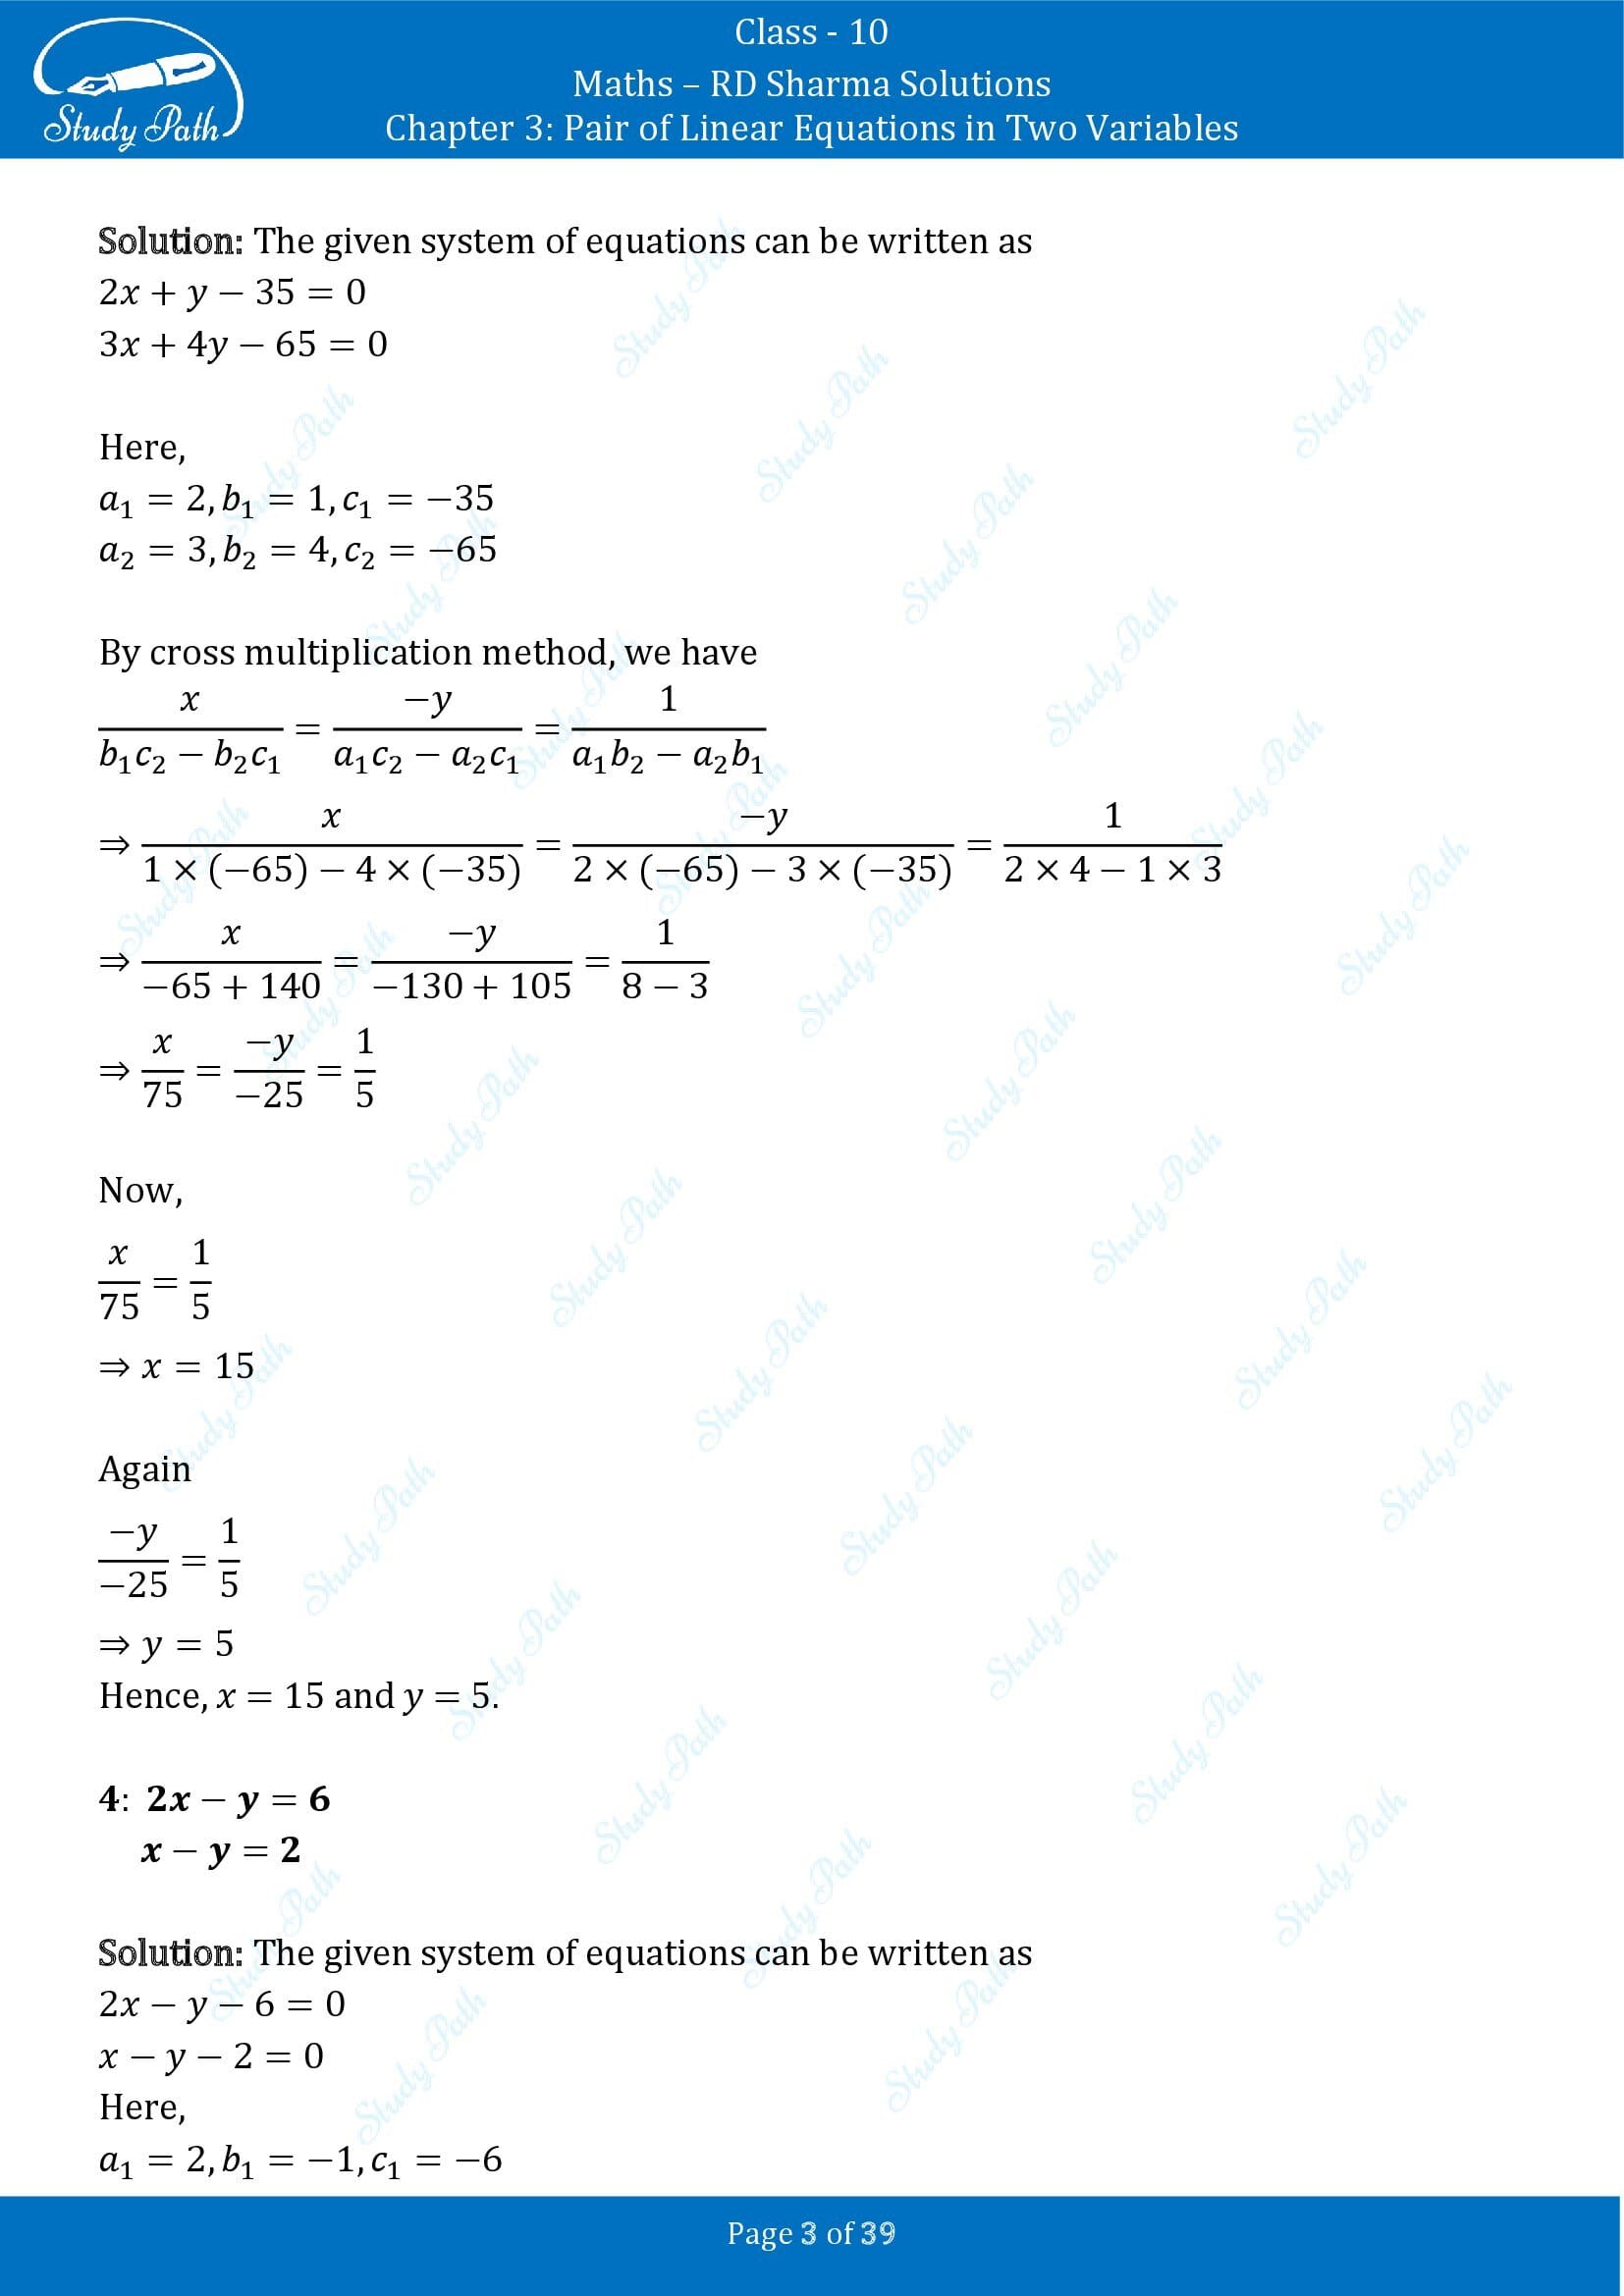 RD Sharma Solutions Class 10 Chapter 3 Pair of Linear Equations in Two Variables Exercise 3.4 00003